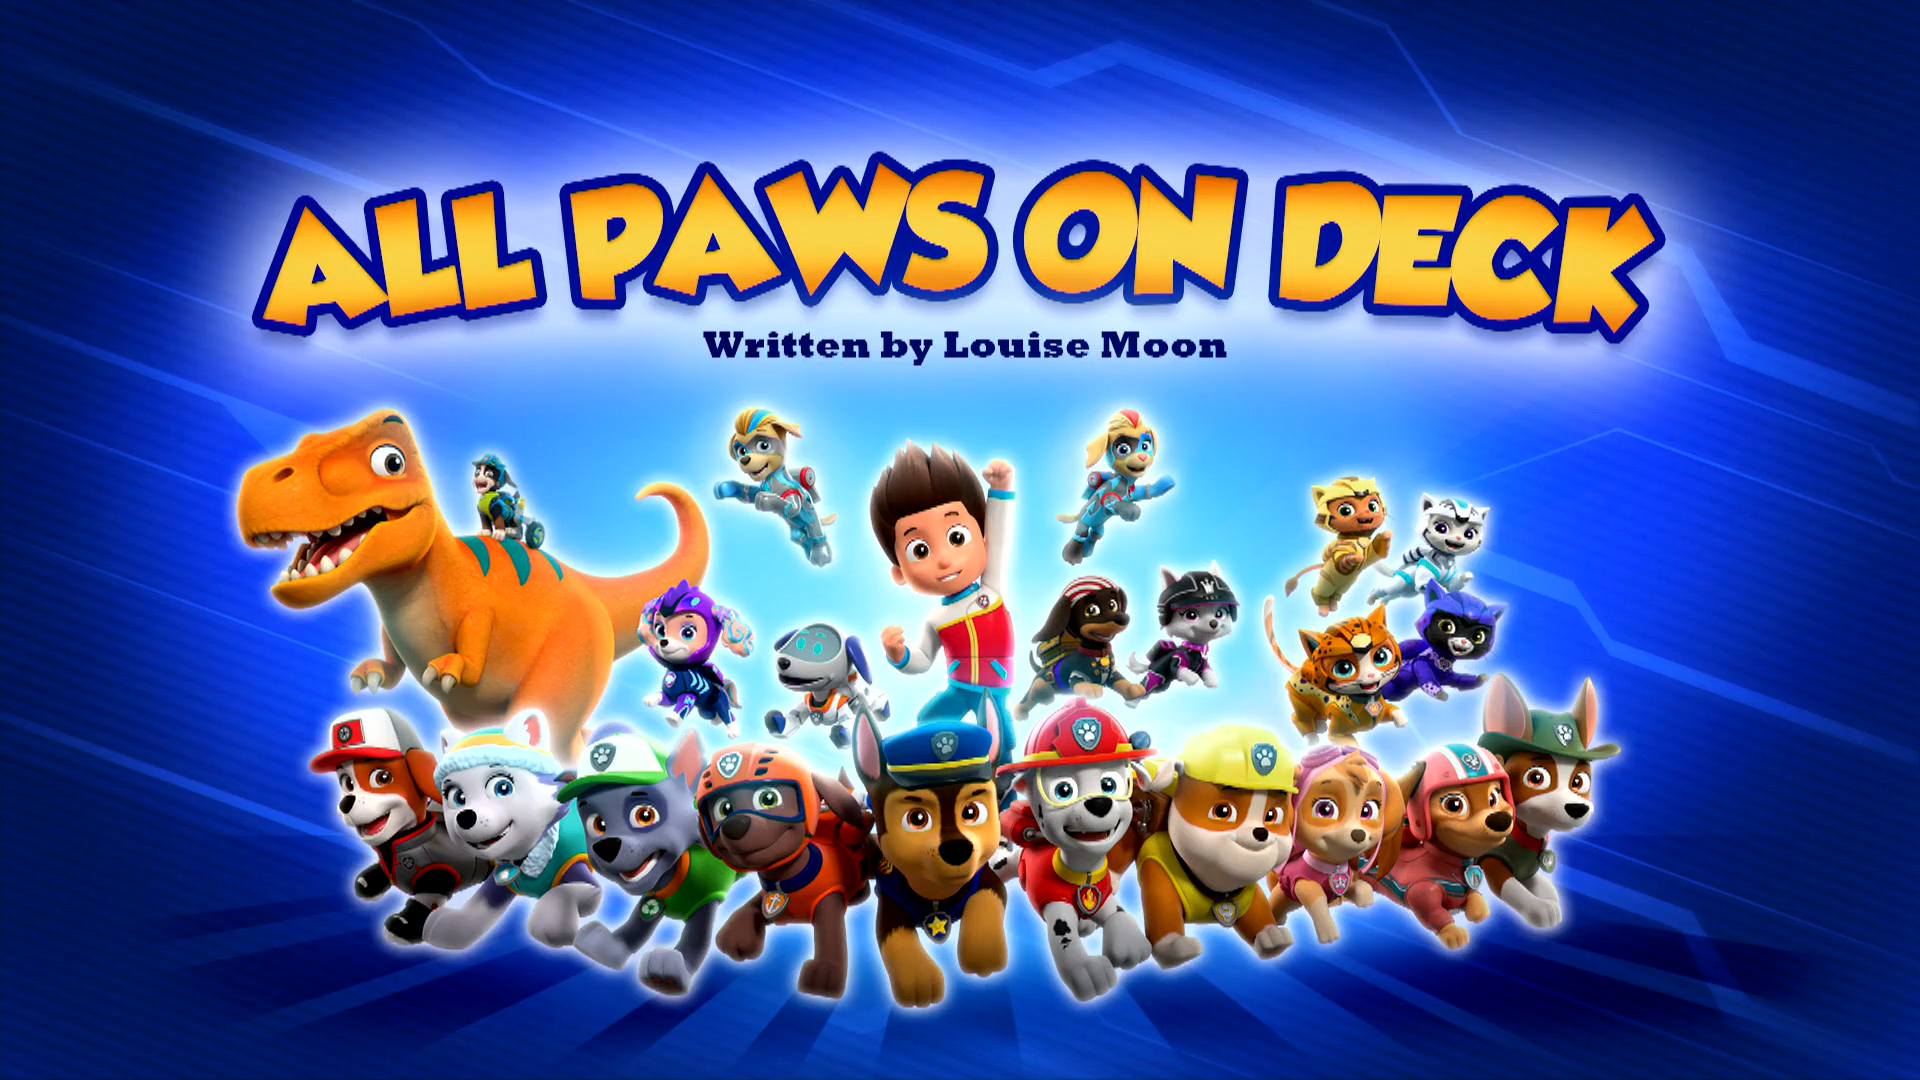 https://static.wikia.nocookie.net/paw-patrol/images/7/7c/All_Paws_On_Deck_%28HQ%29.png/revision/latest?cb=20221210094203